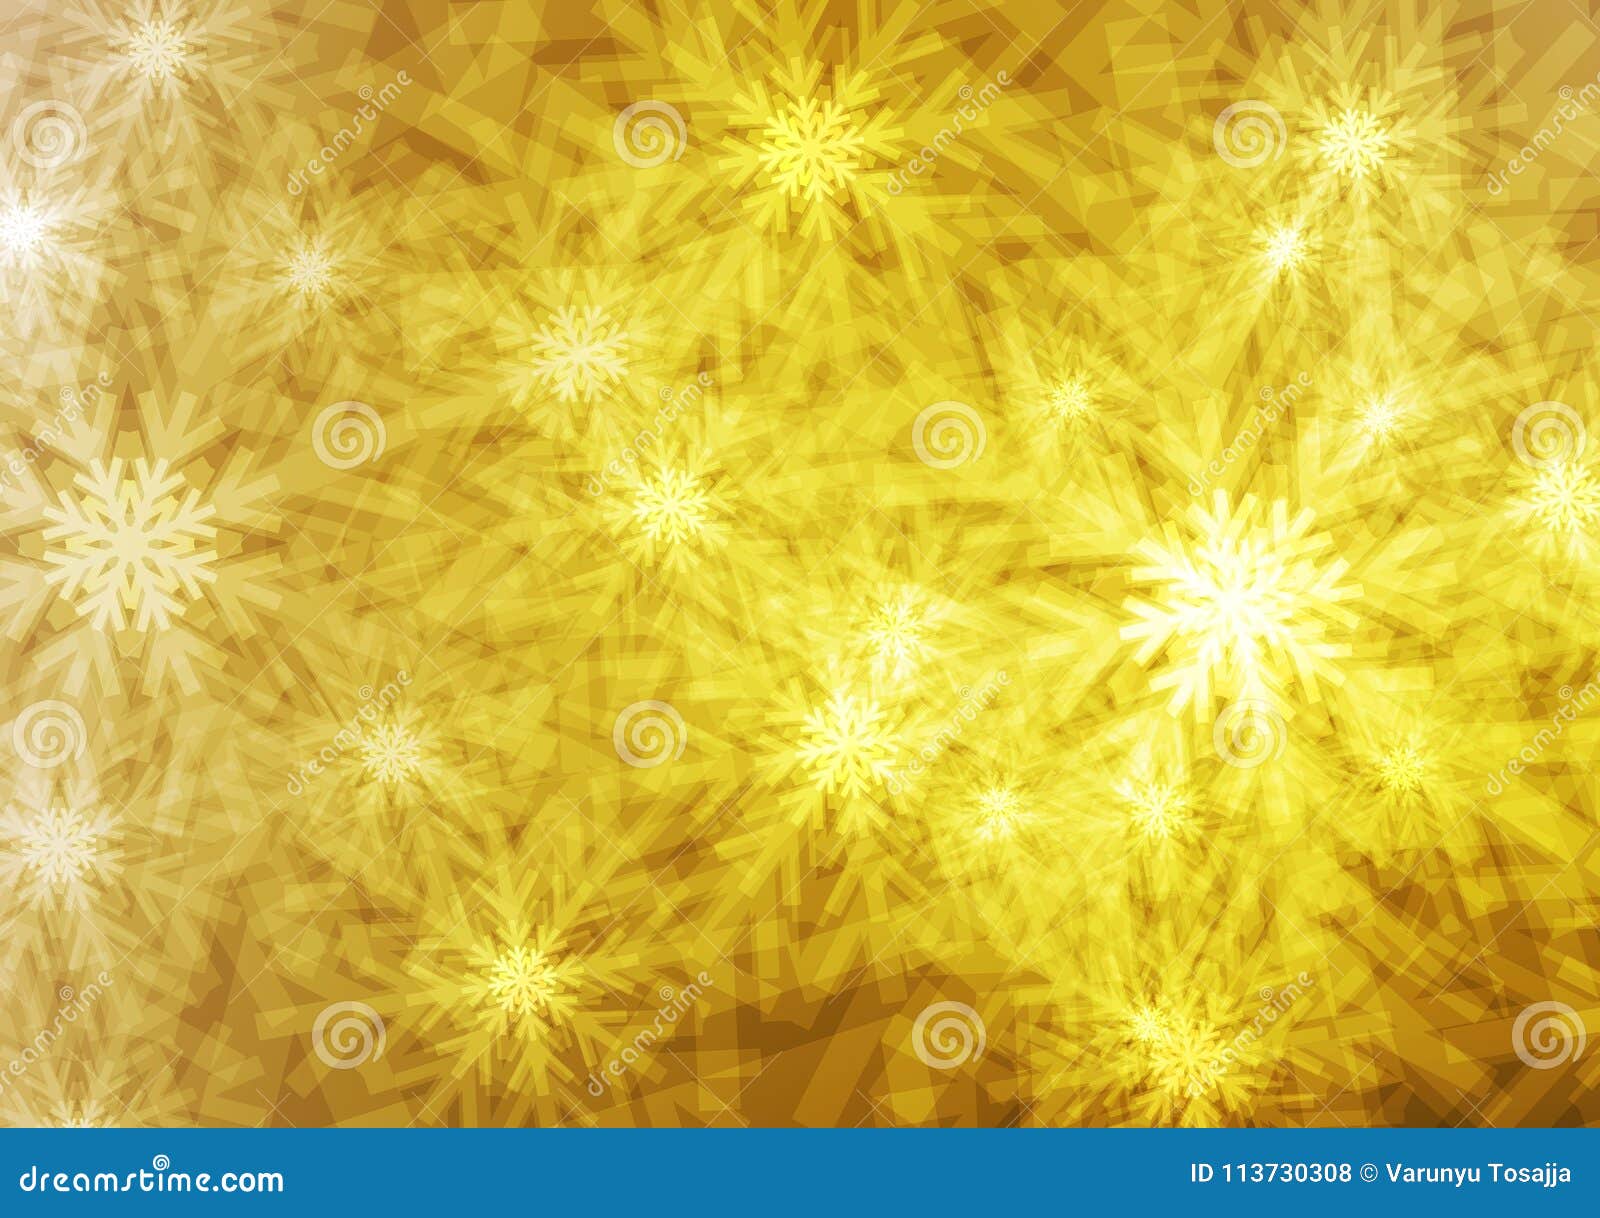 Shiny Flakes or Crystal on Yellow and Gold Background; Winter and Christmas  Day Concept; Design for Wallpaper. Stock Illustration - Illustration of  input, concept: 113730308